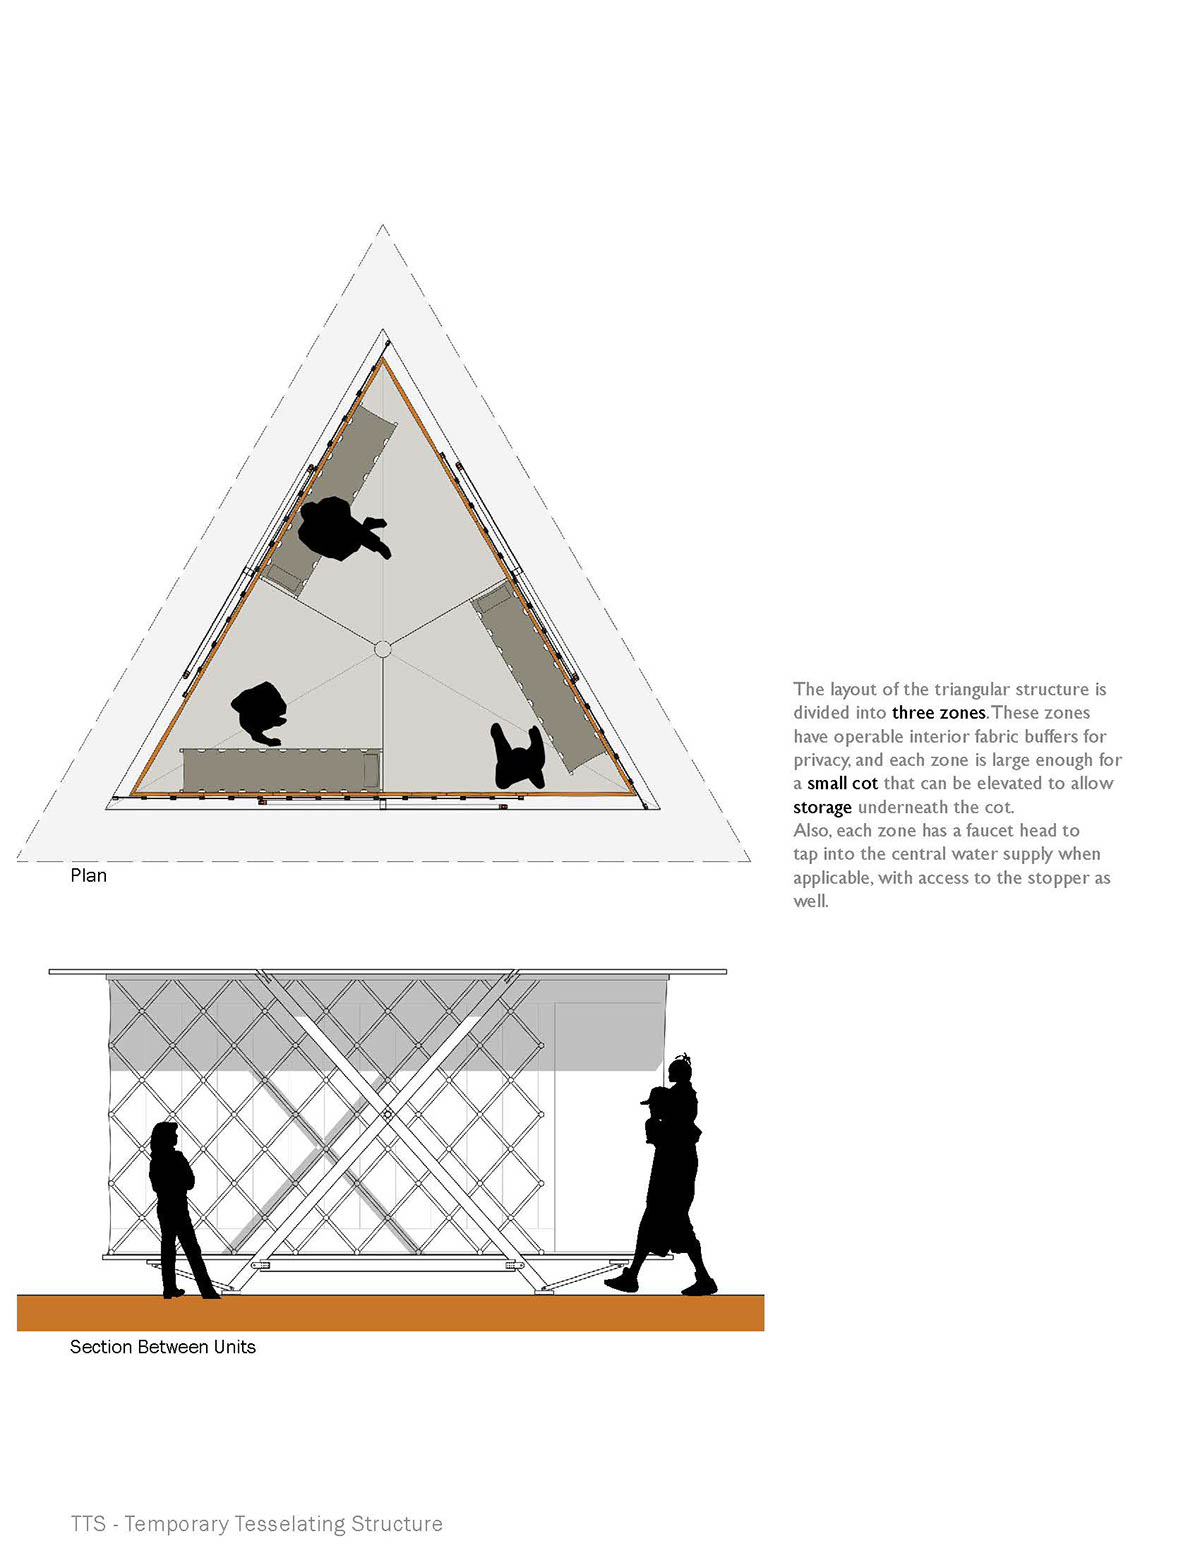 Disaster Relief Structure Incubator Community Center Graphite Rendering kinematic architecture Responsive Architecture